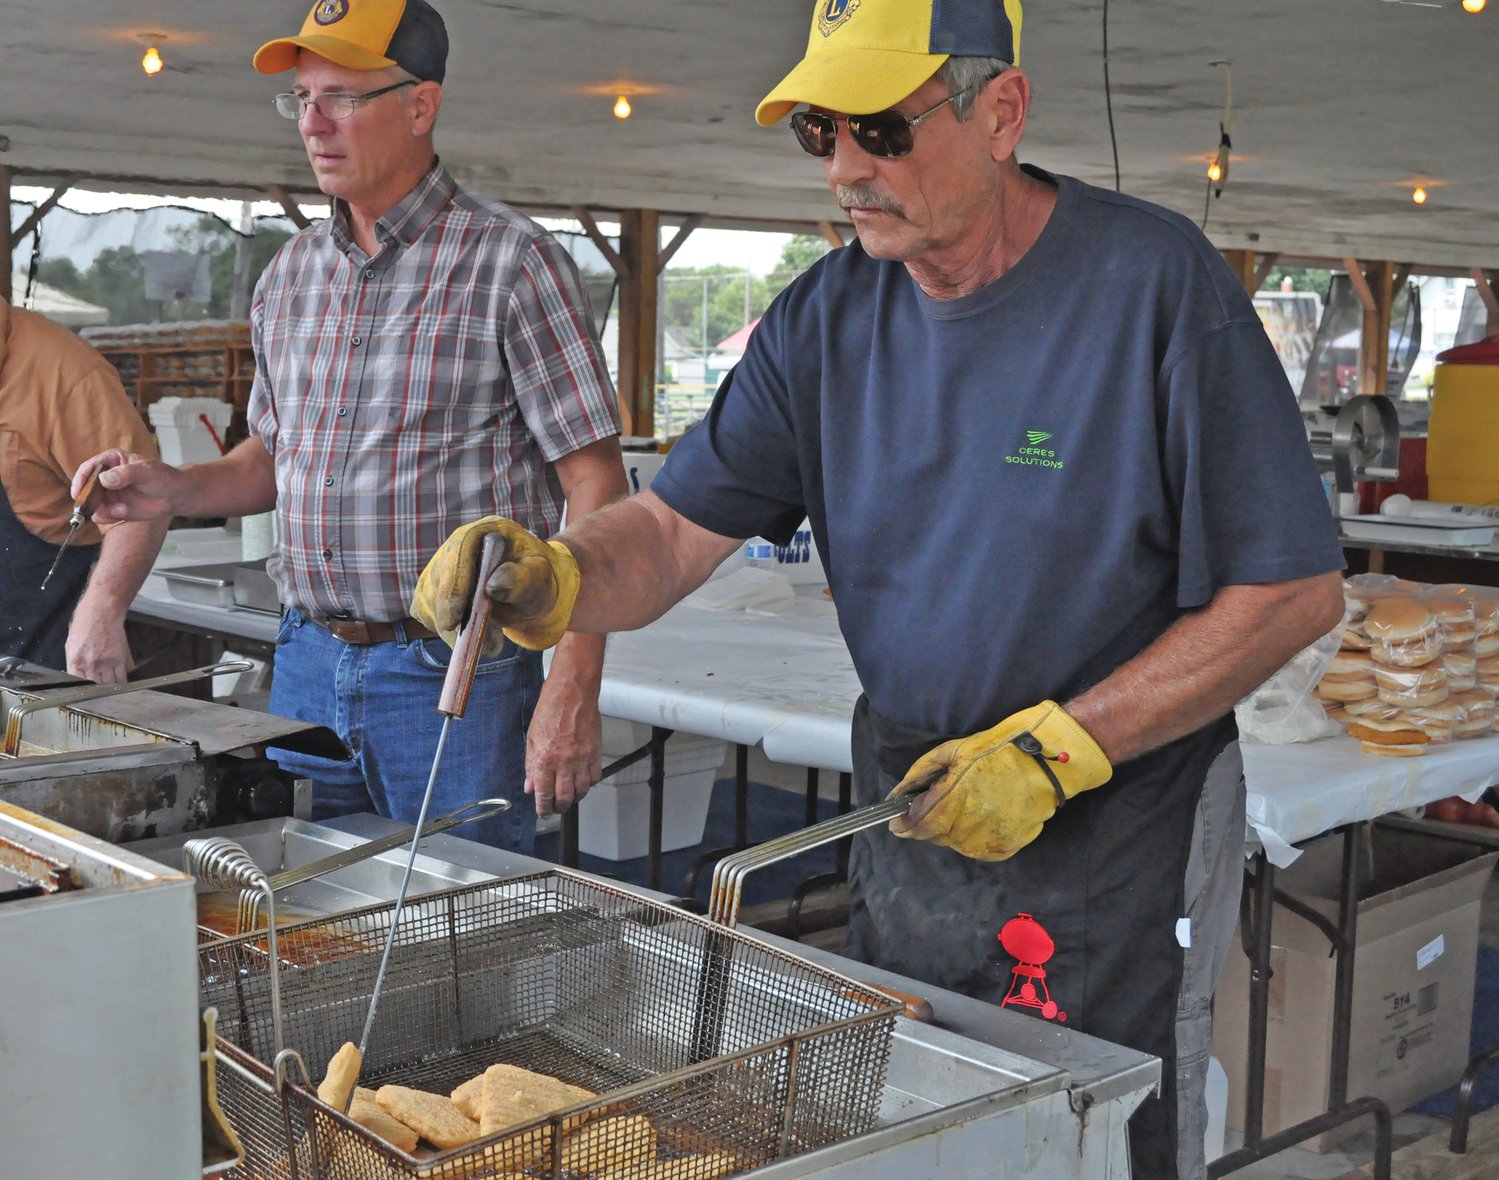 EJ Dixon fries fish alongside Alan Hedge at the Ladoga Lions Club Fish Fry on Friday. The 81st annual event featured live music, fireworks, carnival games and vendor booths.